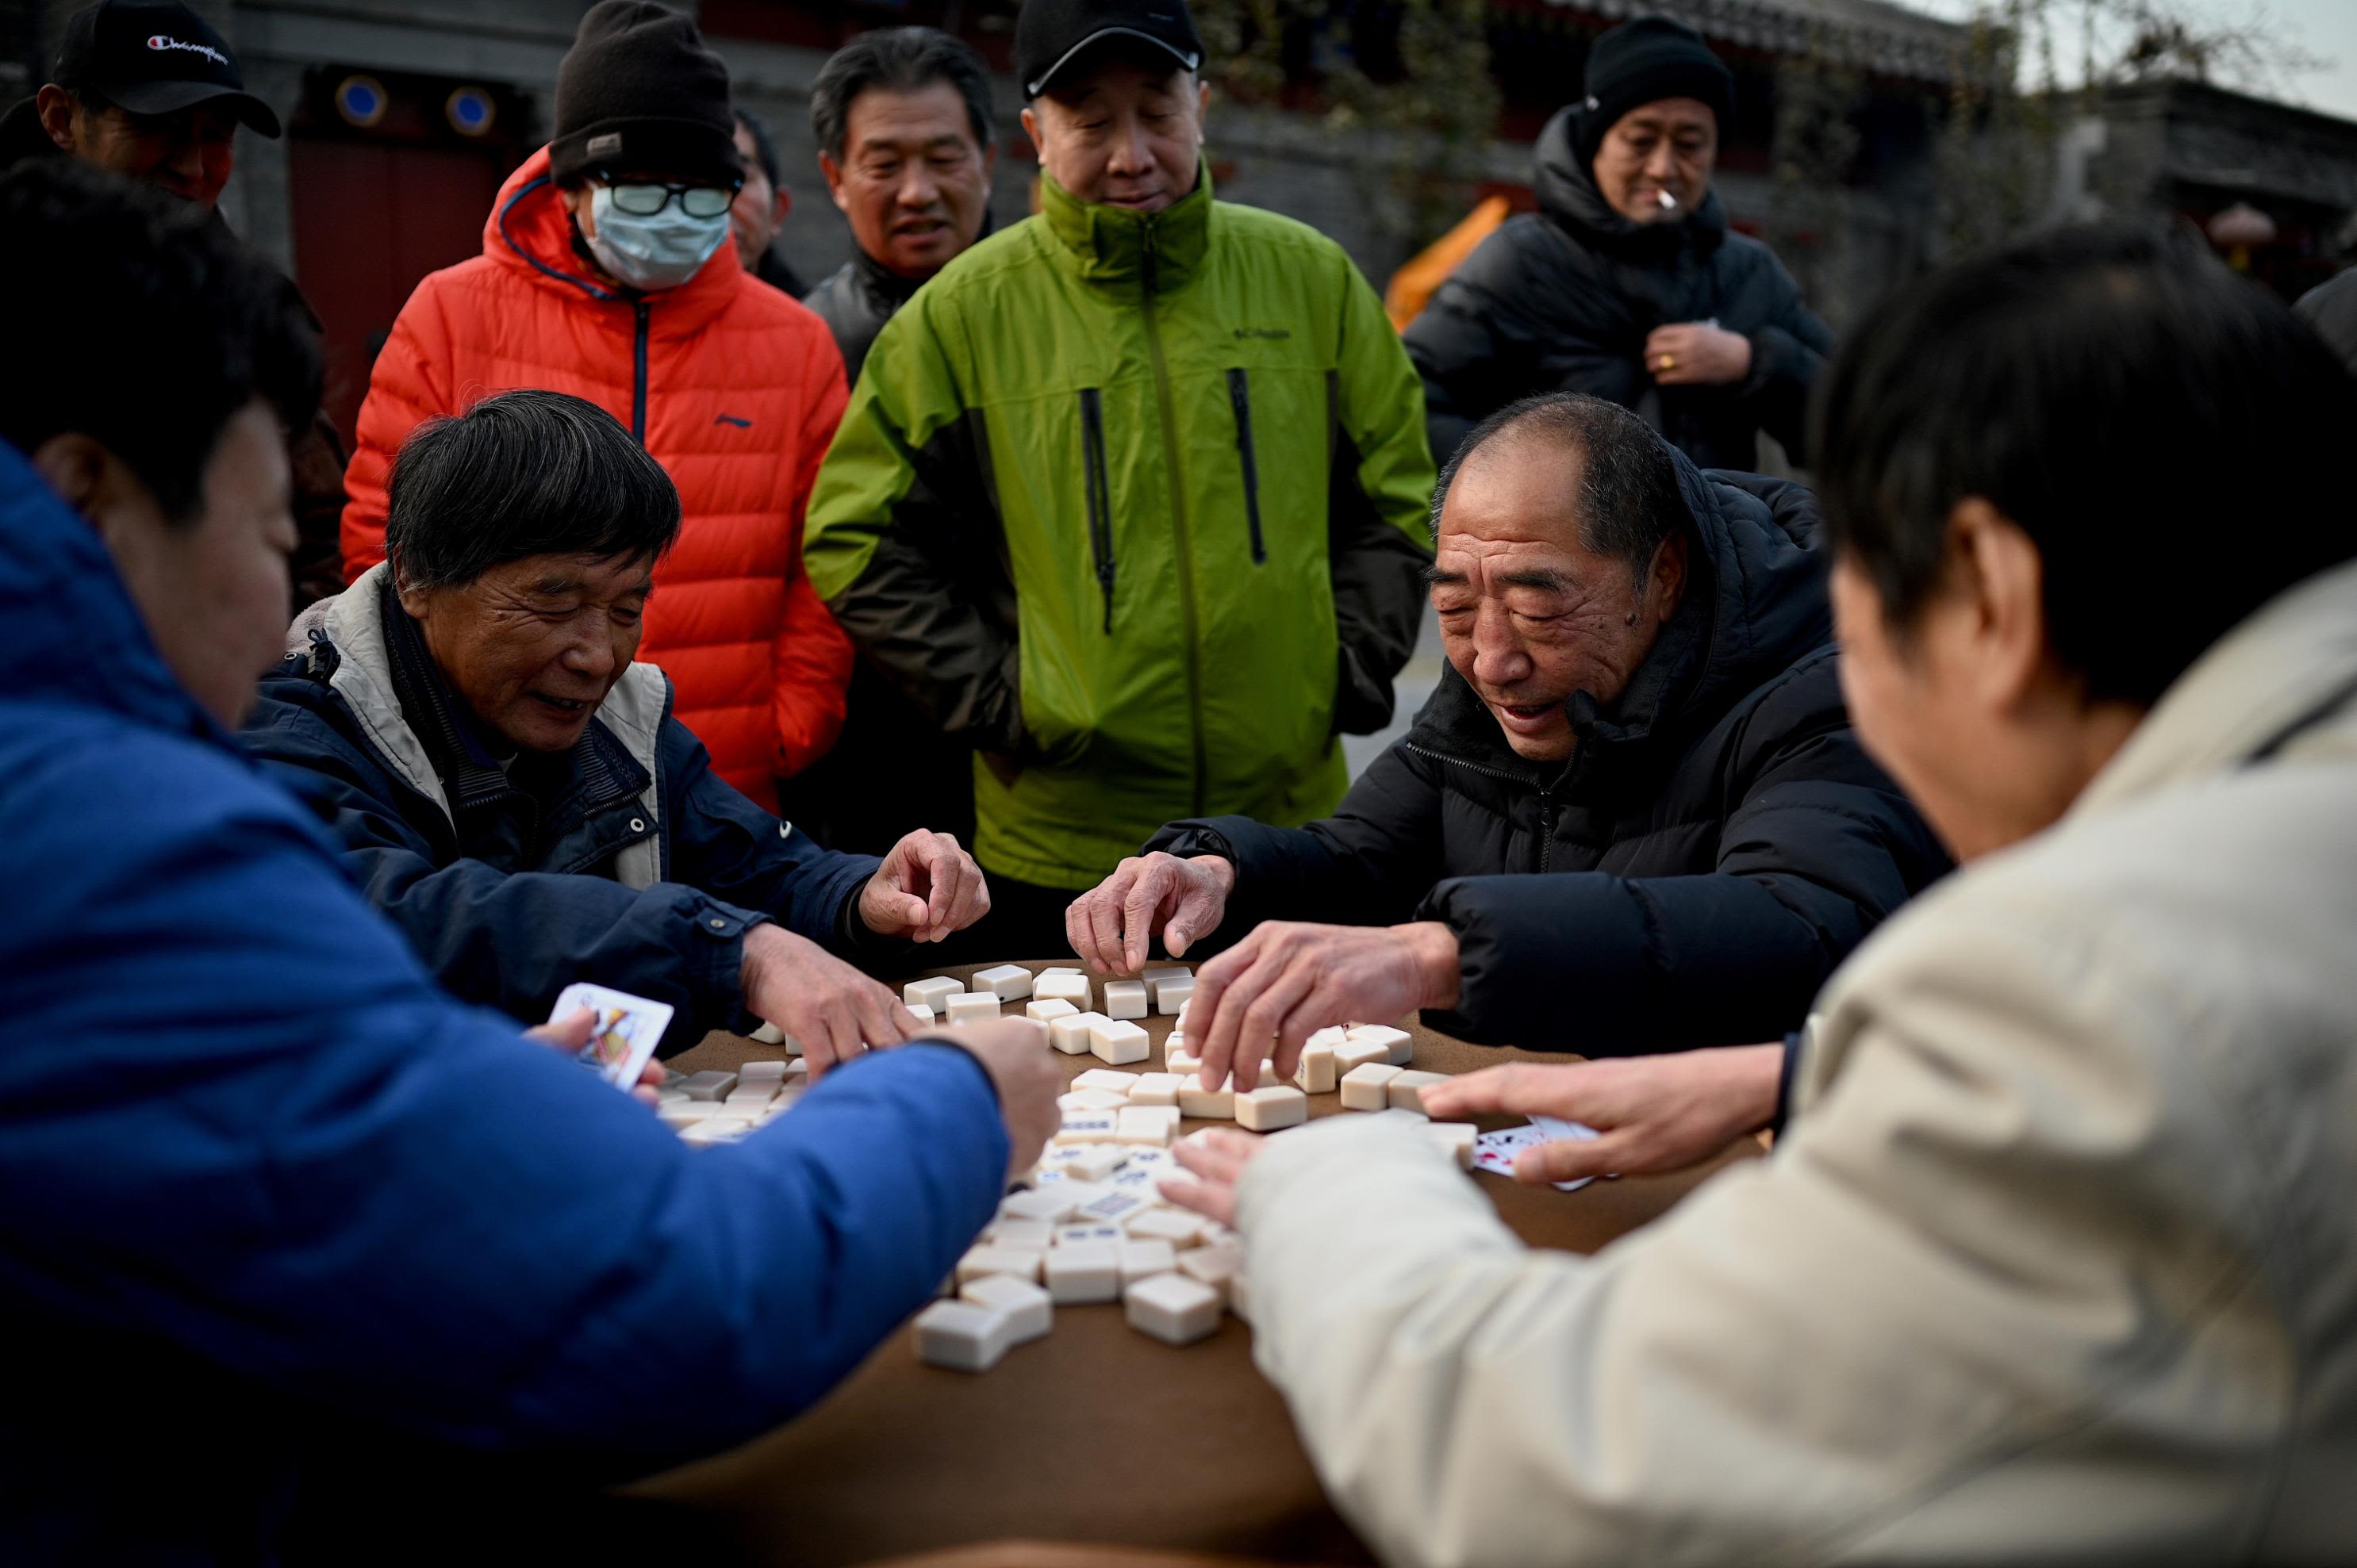 Hot topic: The Mahjong Line comes under fire for cultural